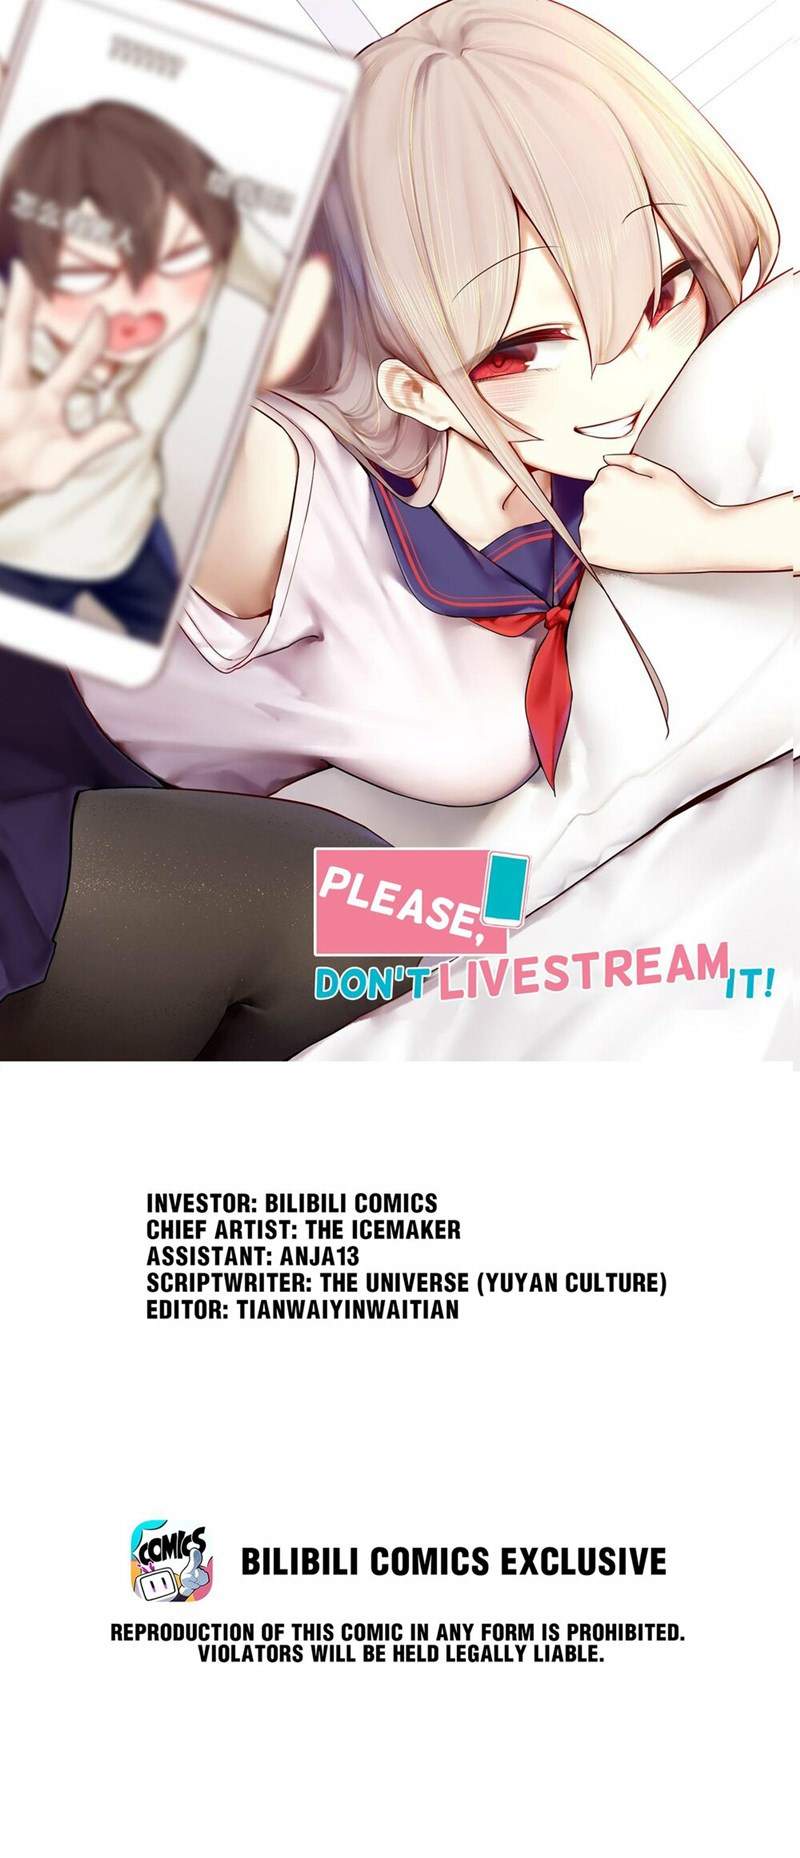 Miss, don’t livestream it! Chapter 26-2